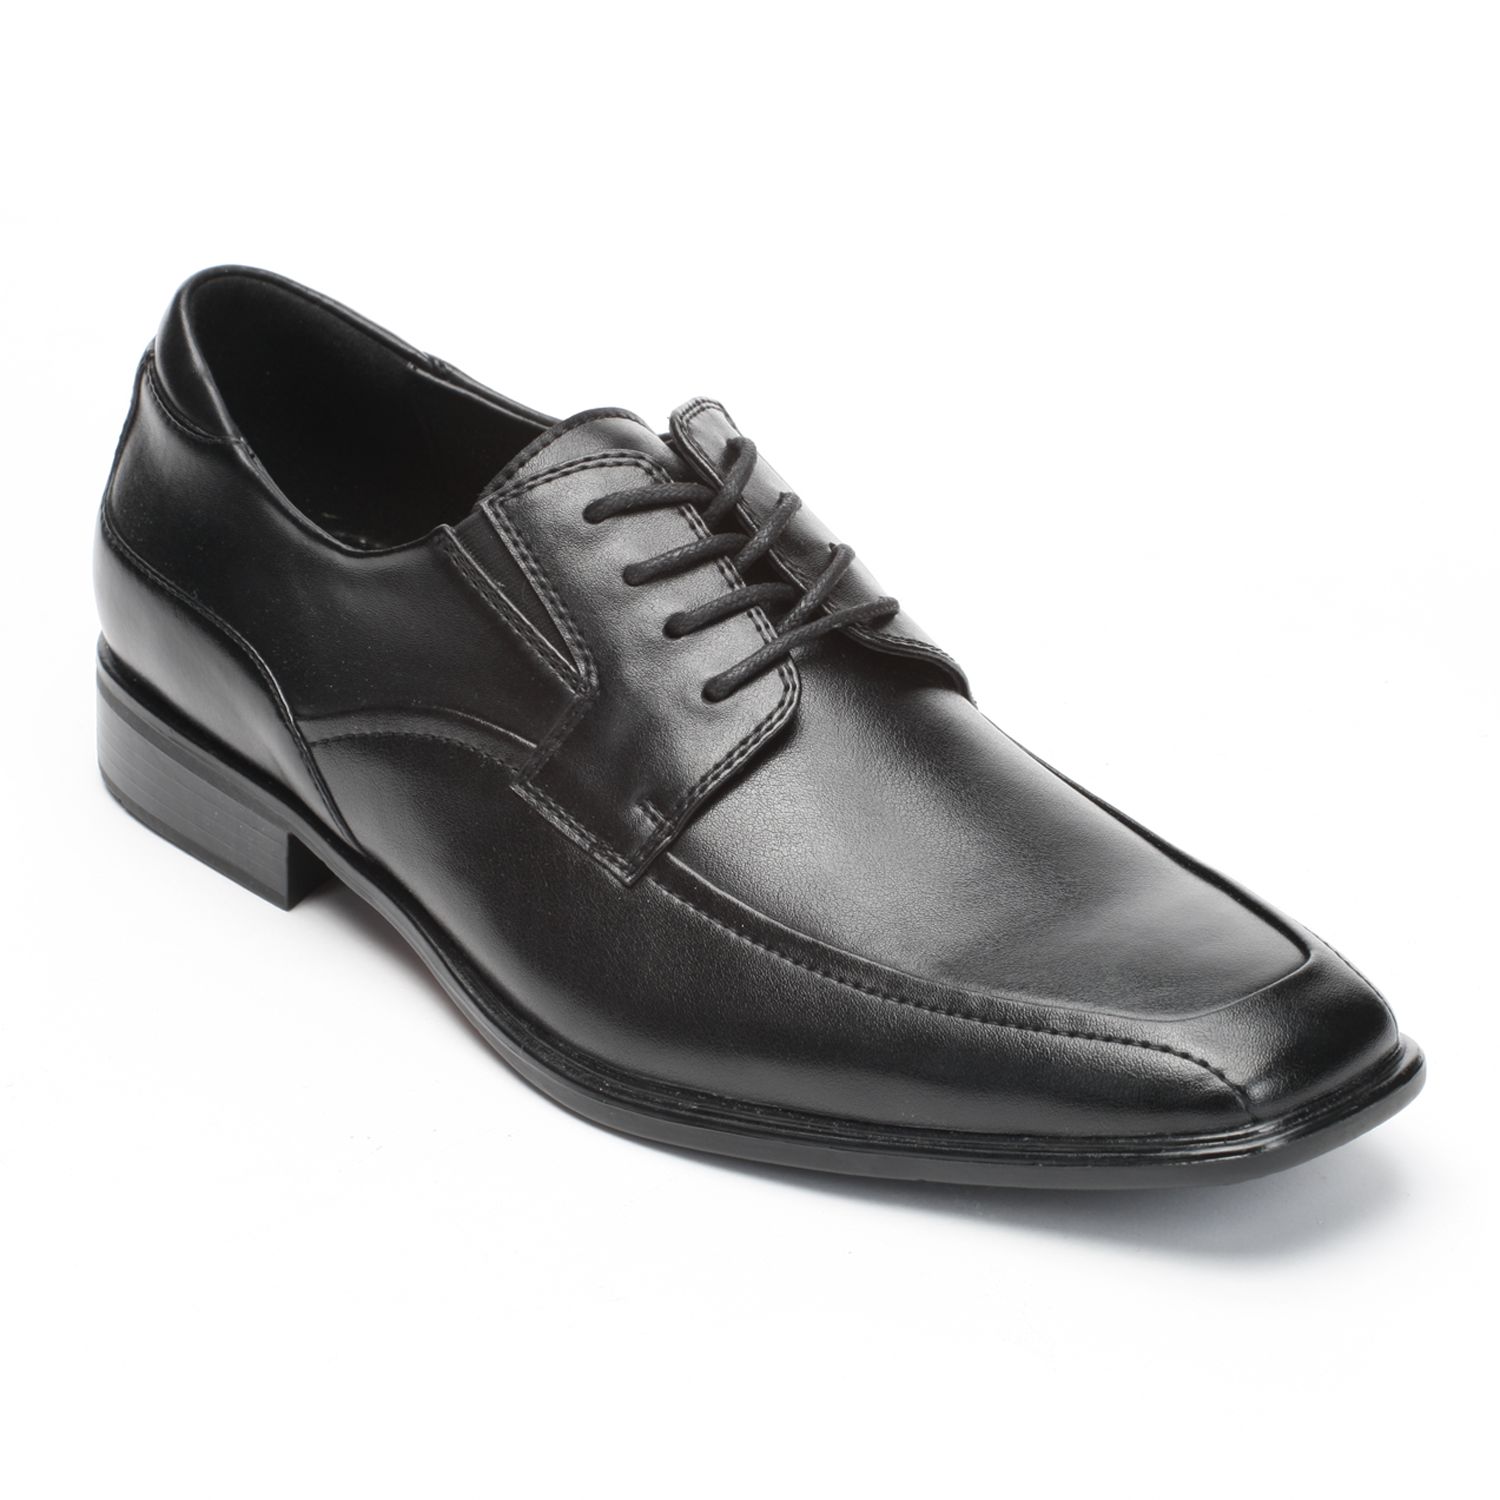 where to buy mens dress shoes near me